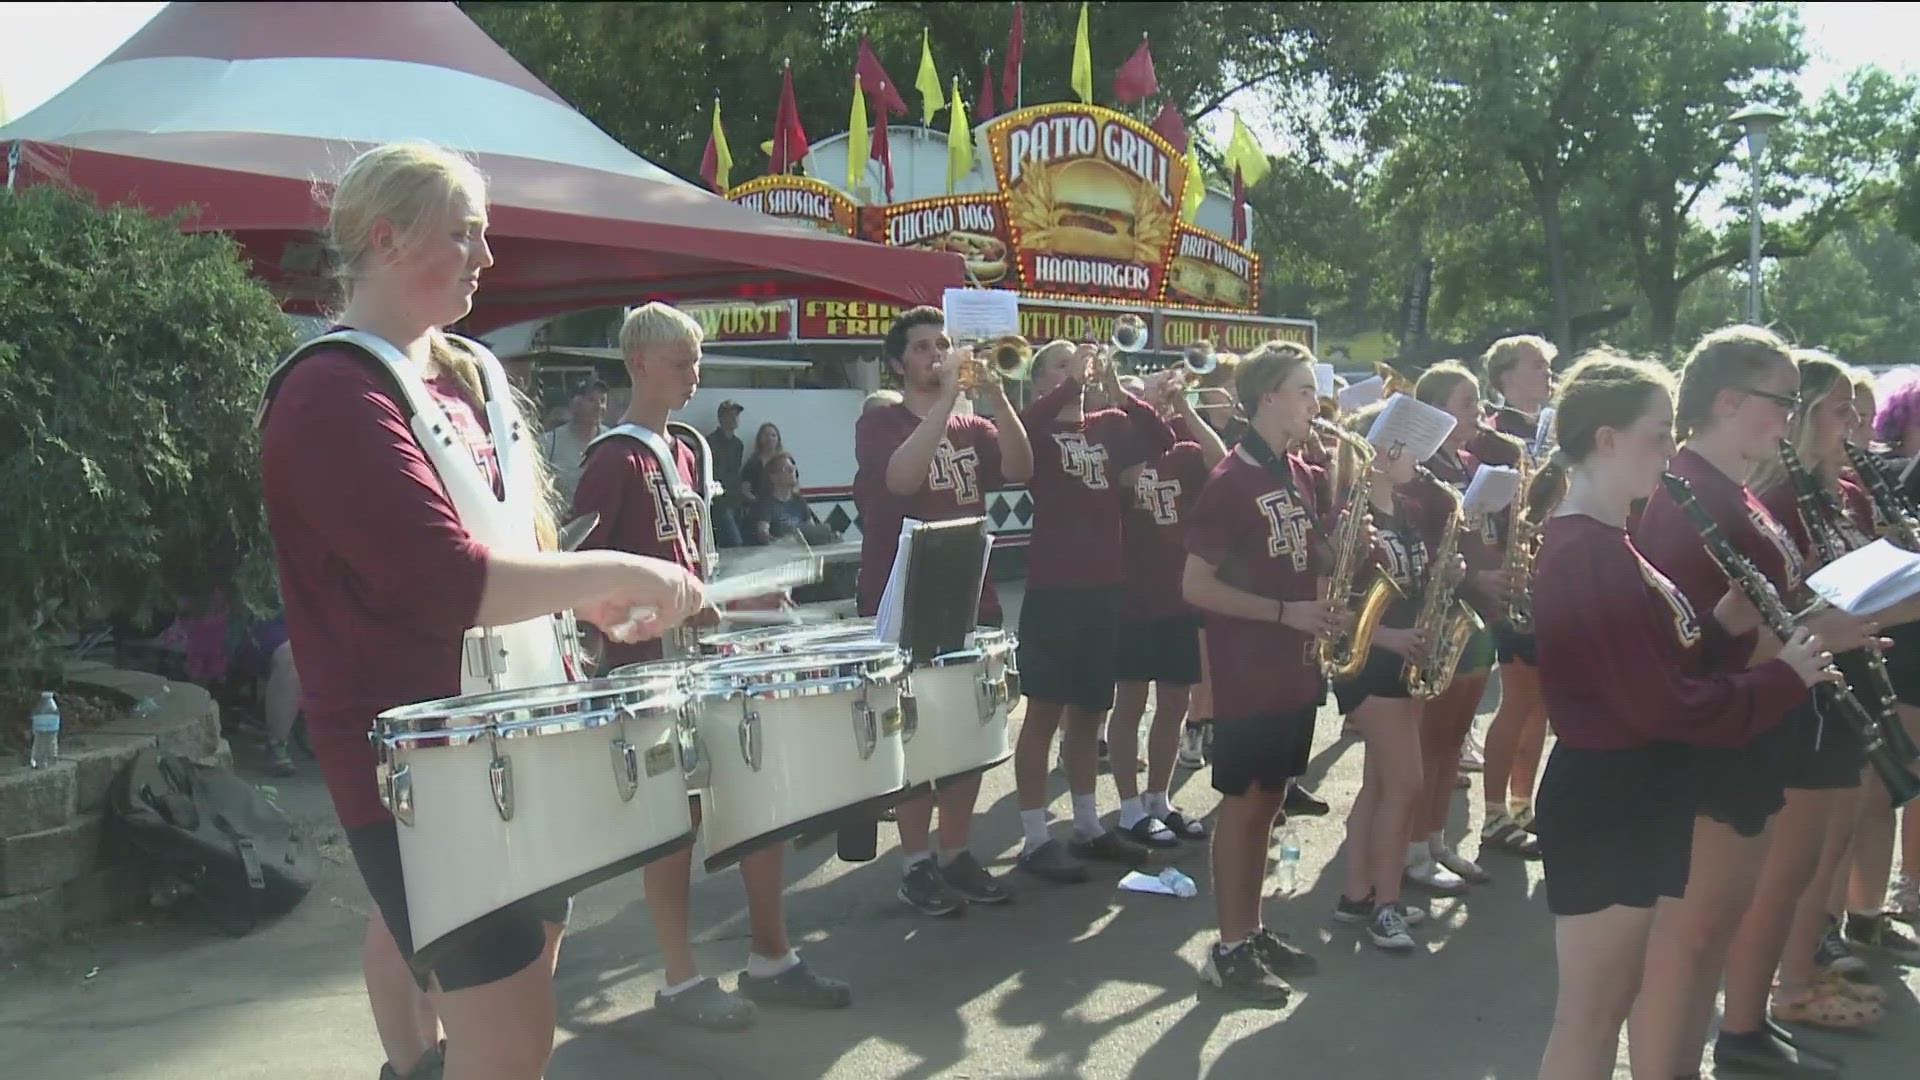 Fergus Falls High School marching band put on a show at the Minnesota State Fair.